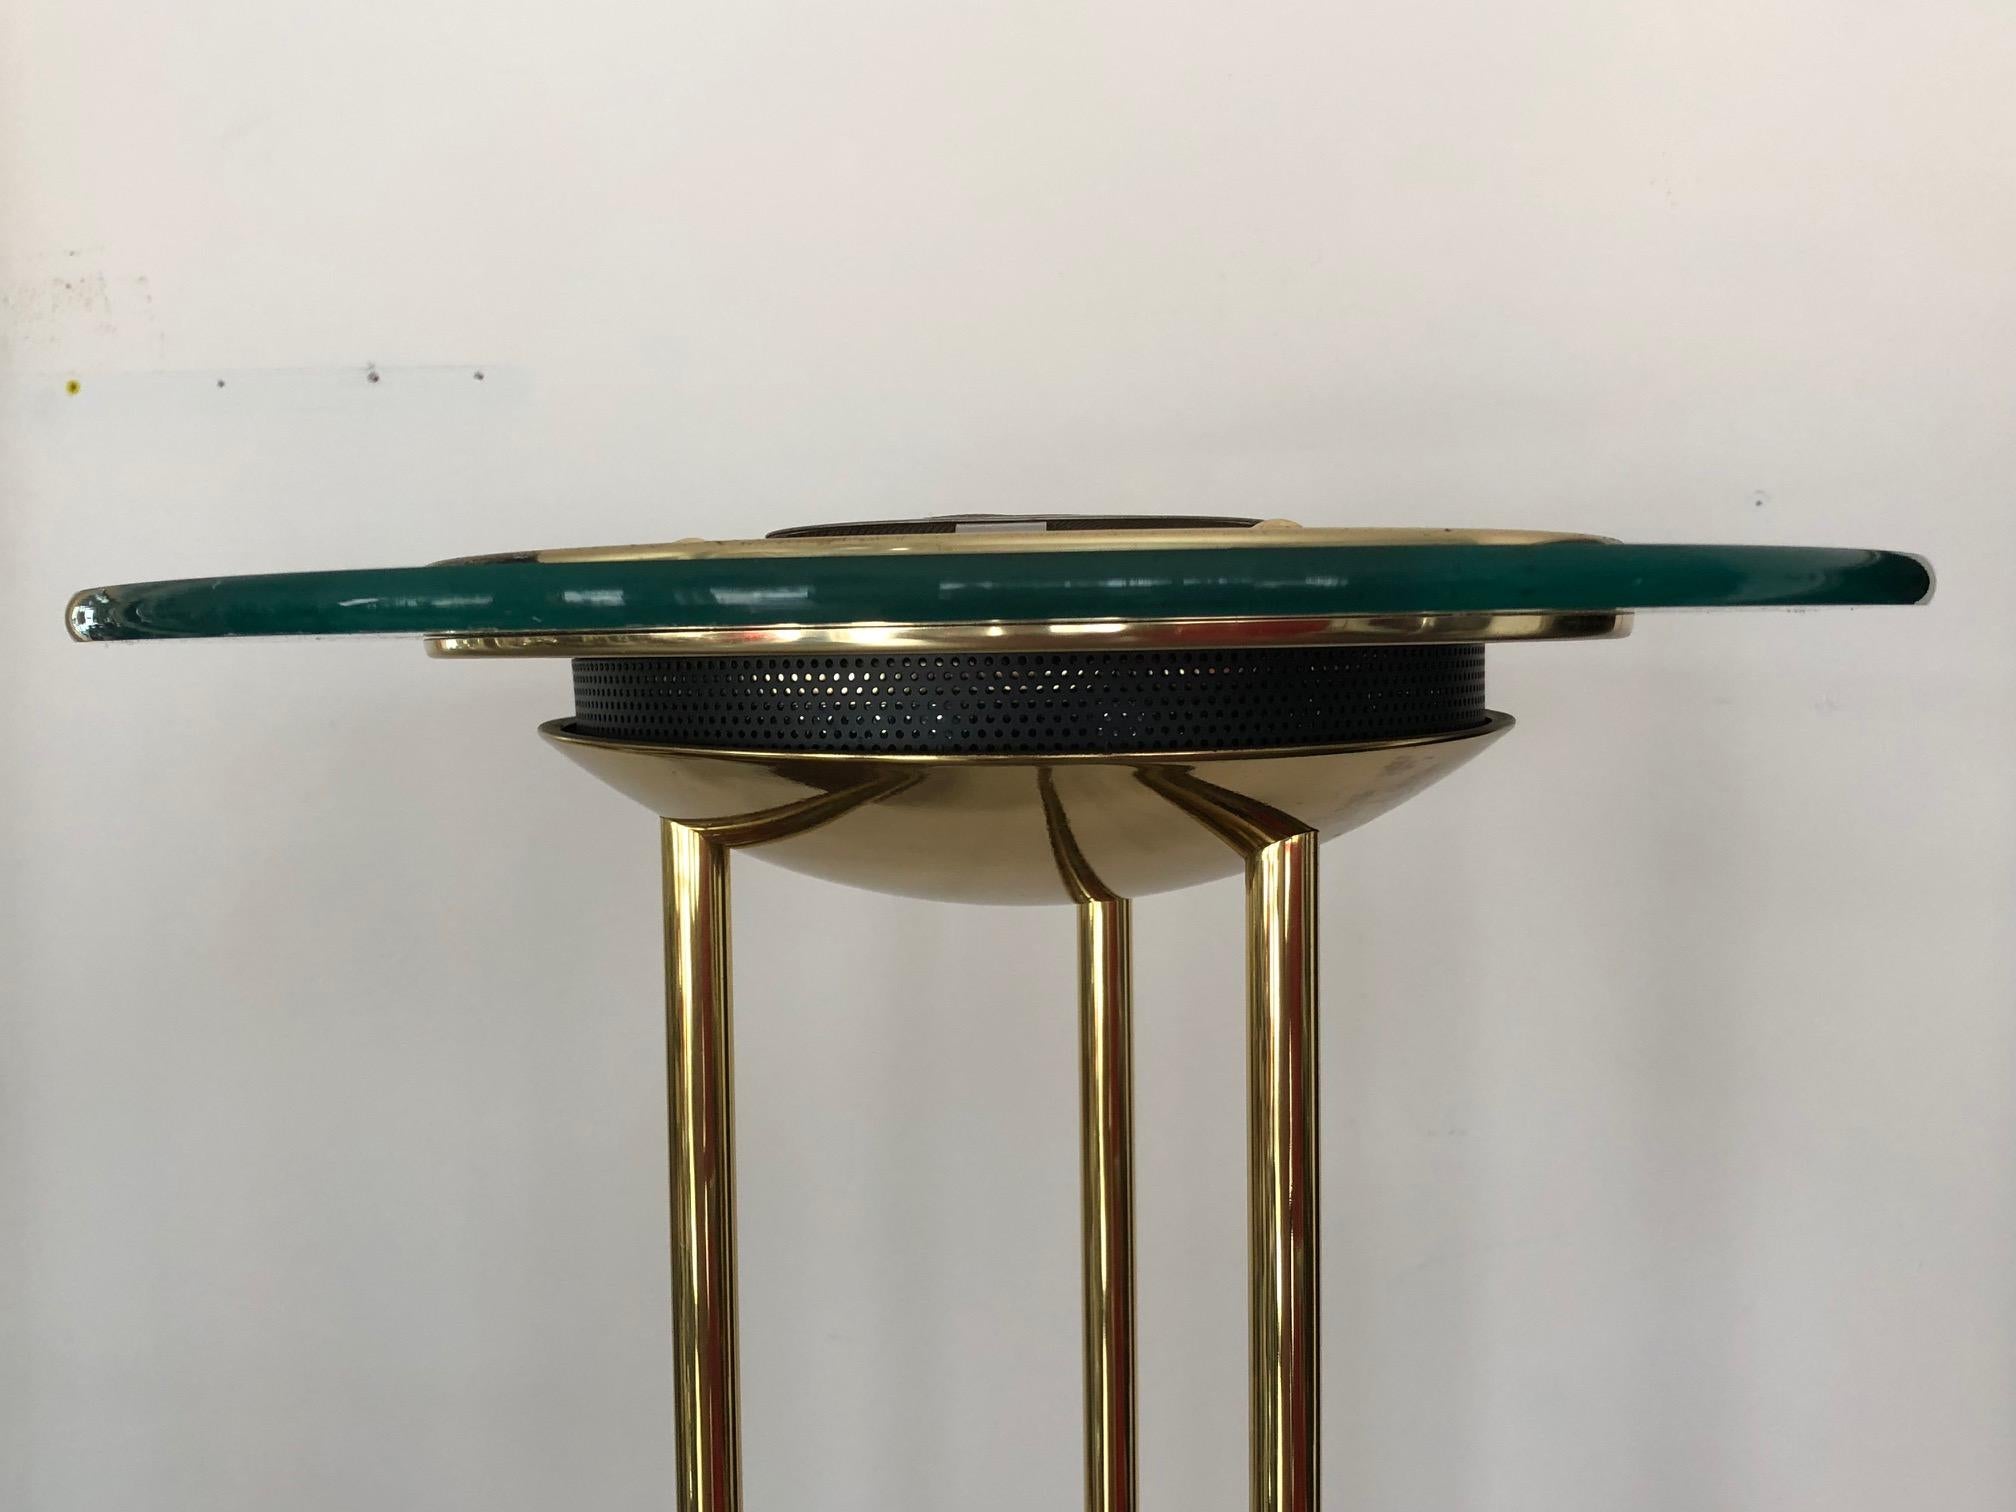 An interesting floor lamp designed by Robert Sonneman for George Kovacs, circa 1987. Very well made with polished brass, marble base, green tinted glass reflector. Comes with a foot switch.